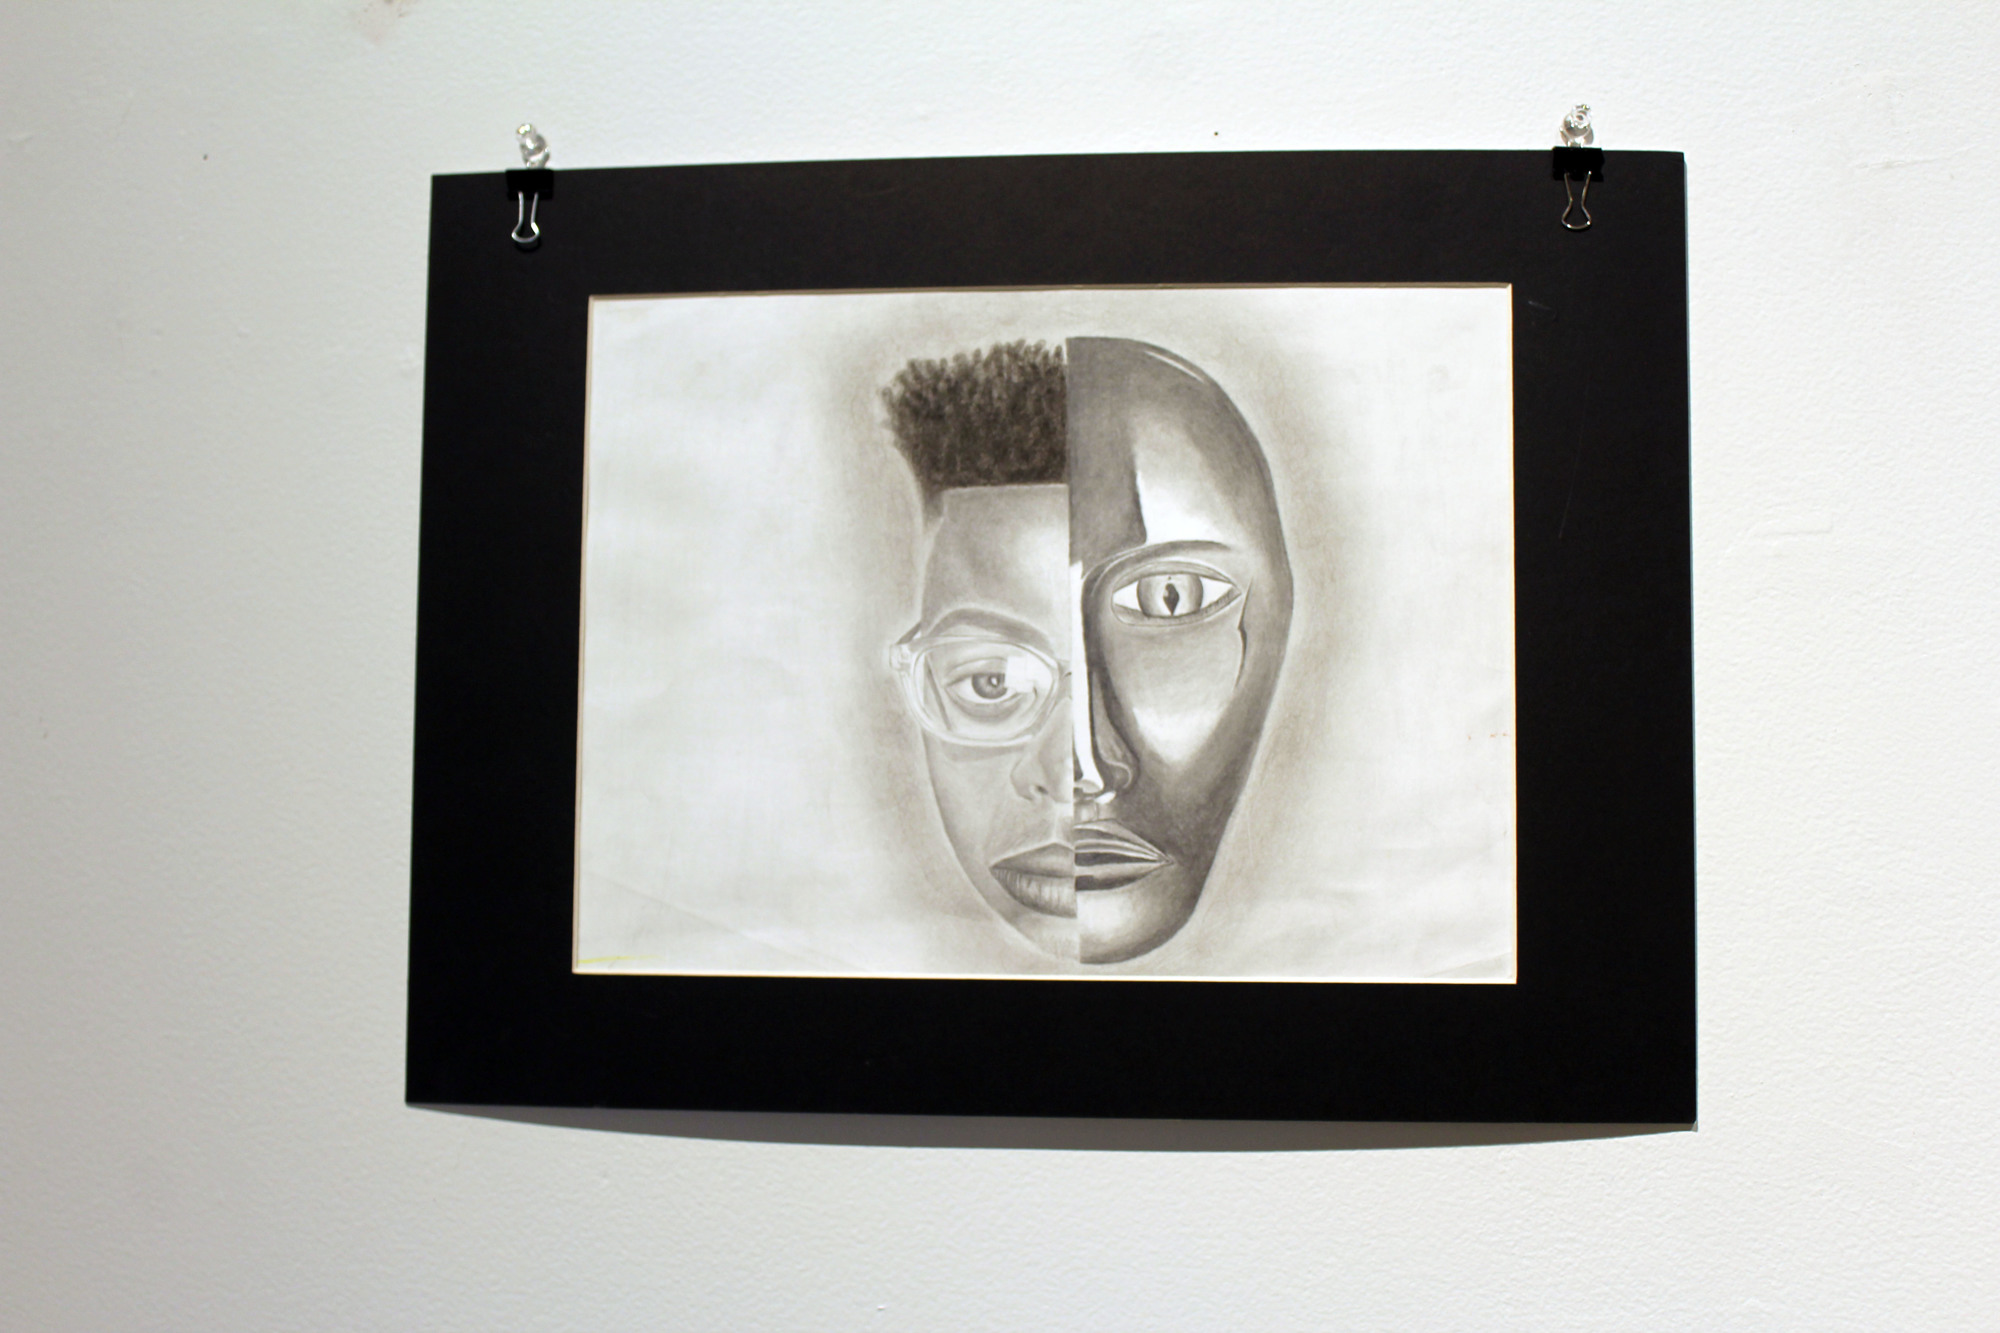 North Port High student Marcus Drummond portrays a two-faced man to depict how he hides his true emotions with smiles, as if he's wearing a mask.